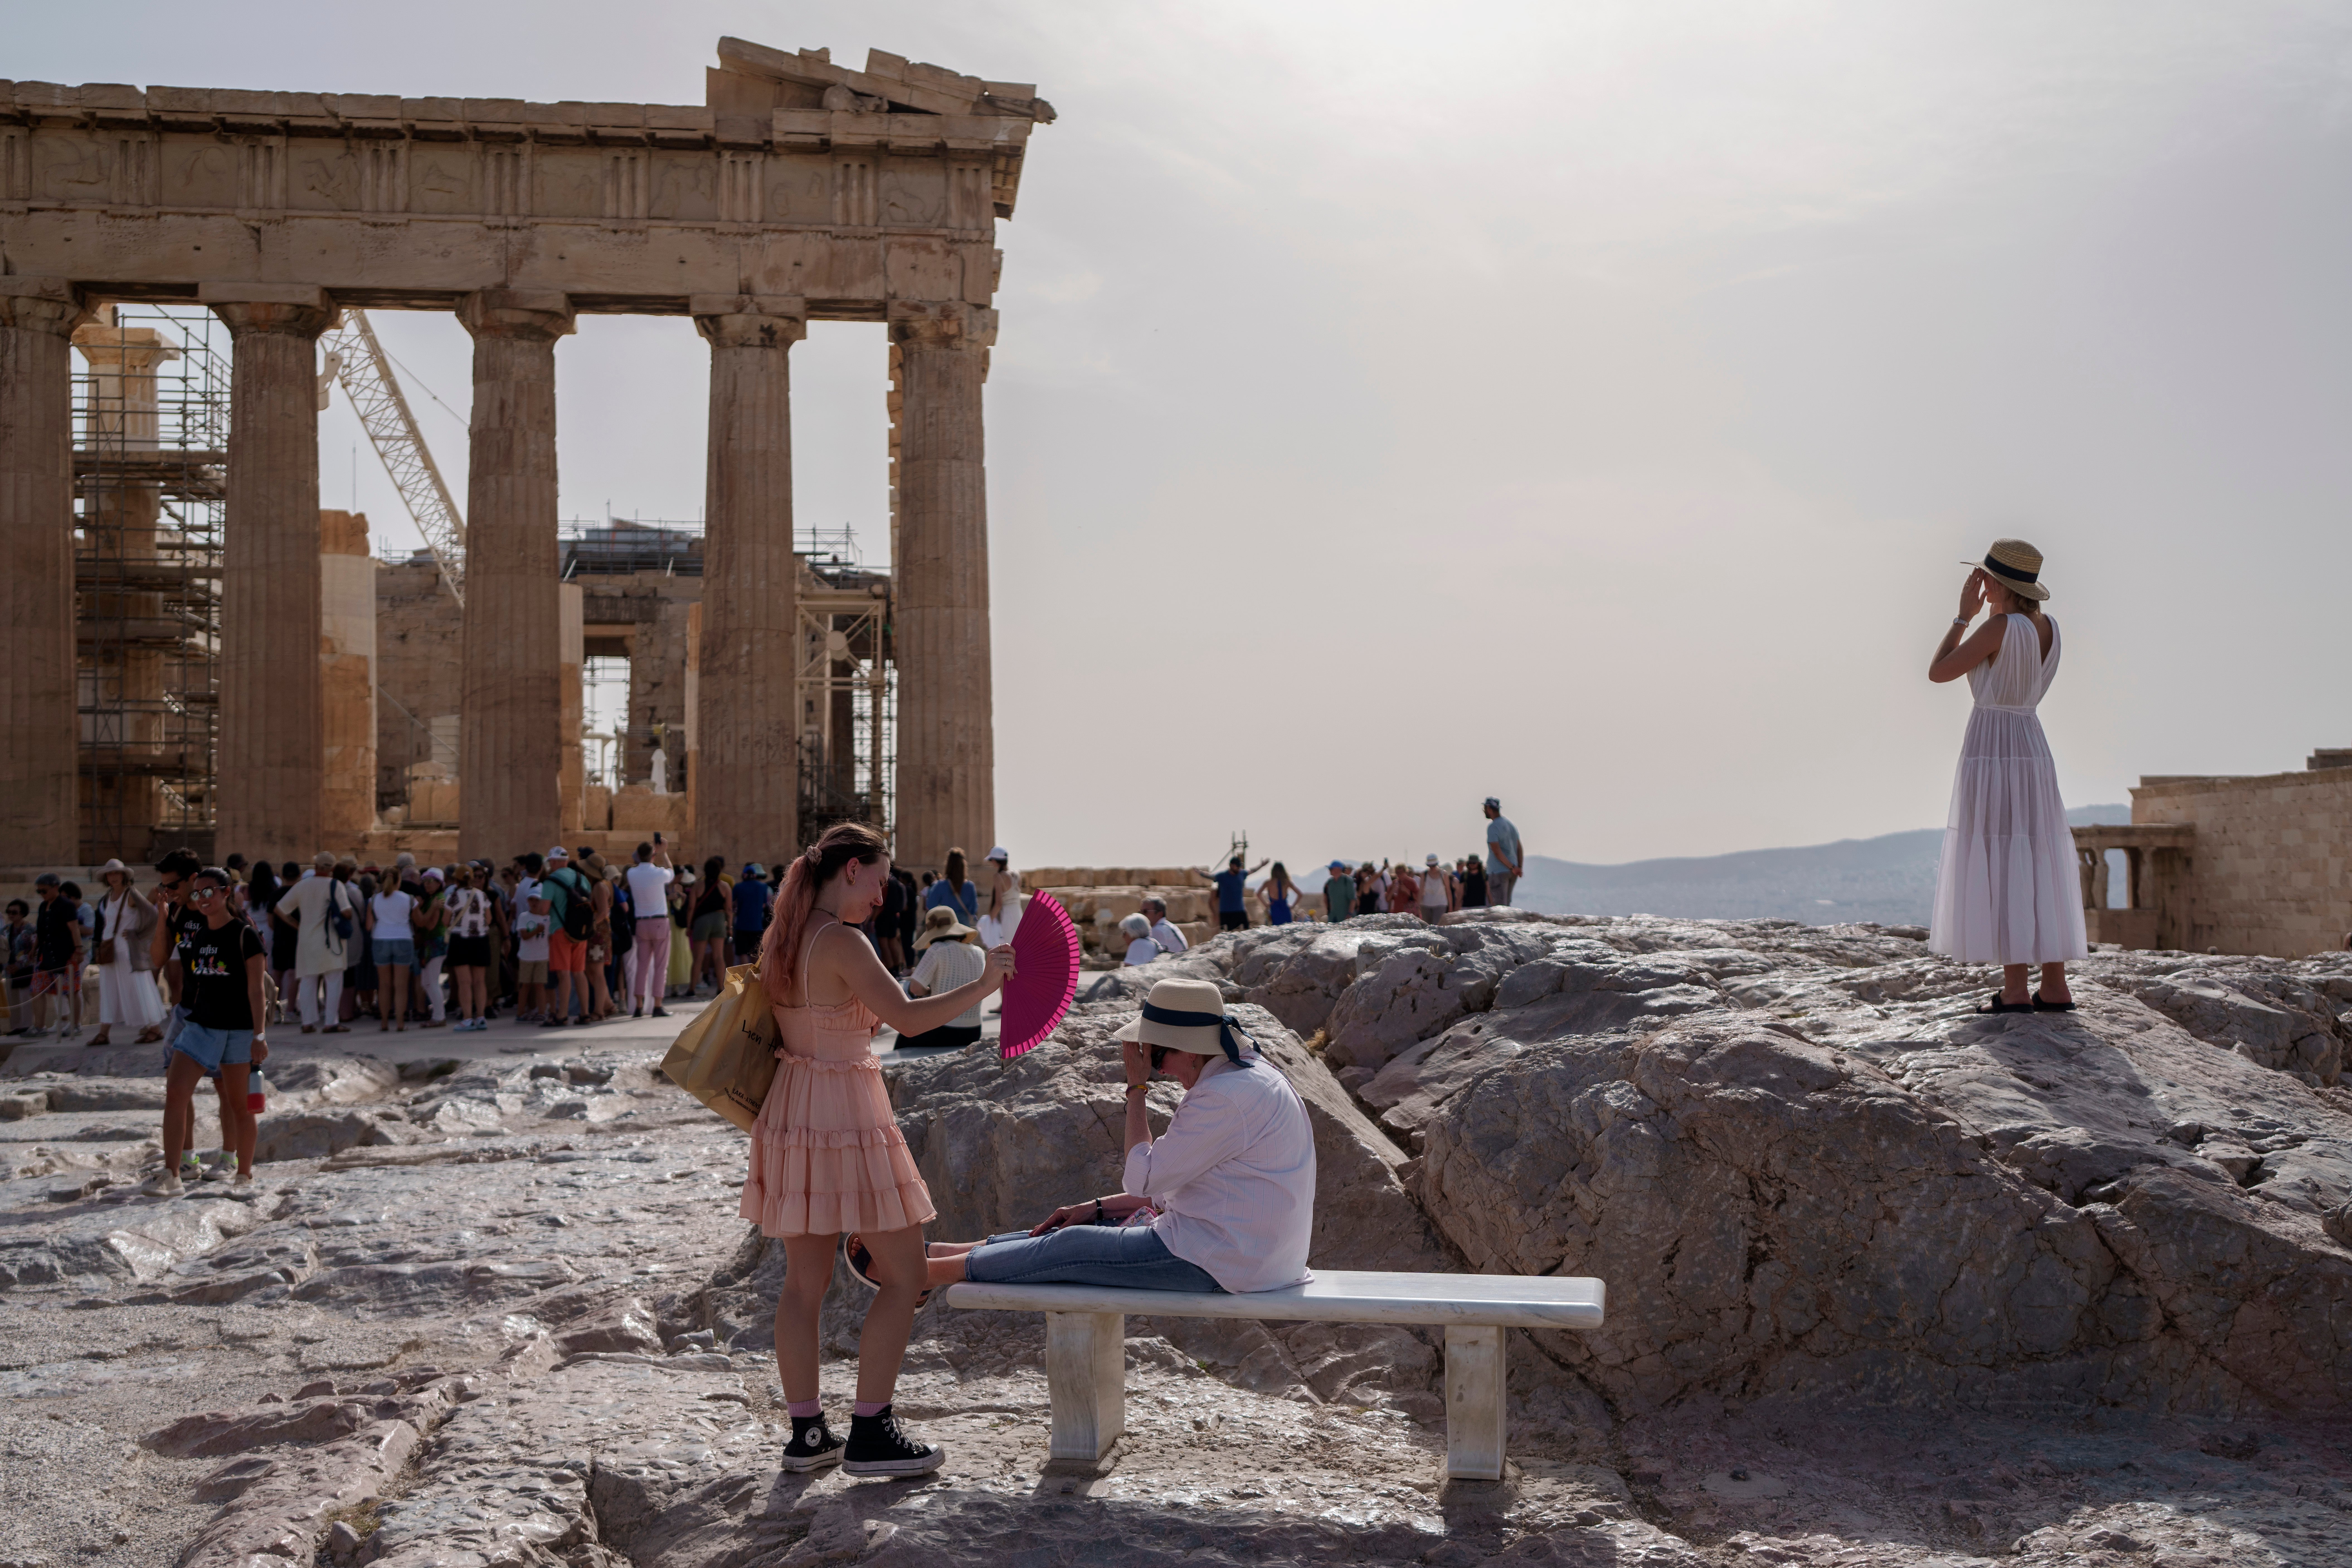 The ancient Acropolis, in Athens, was closed by authorities when temperatures hit 43C